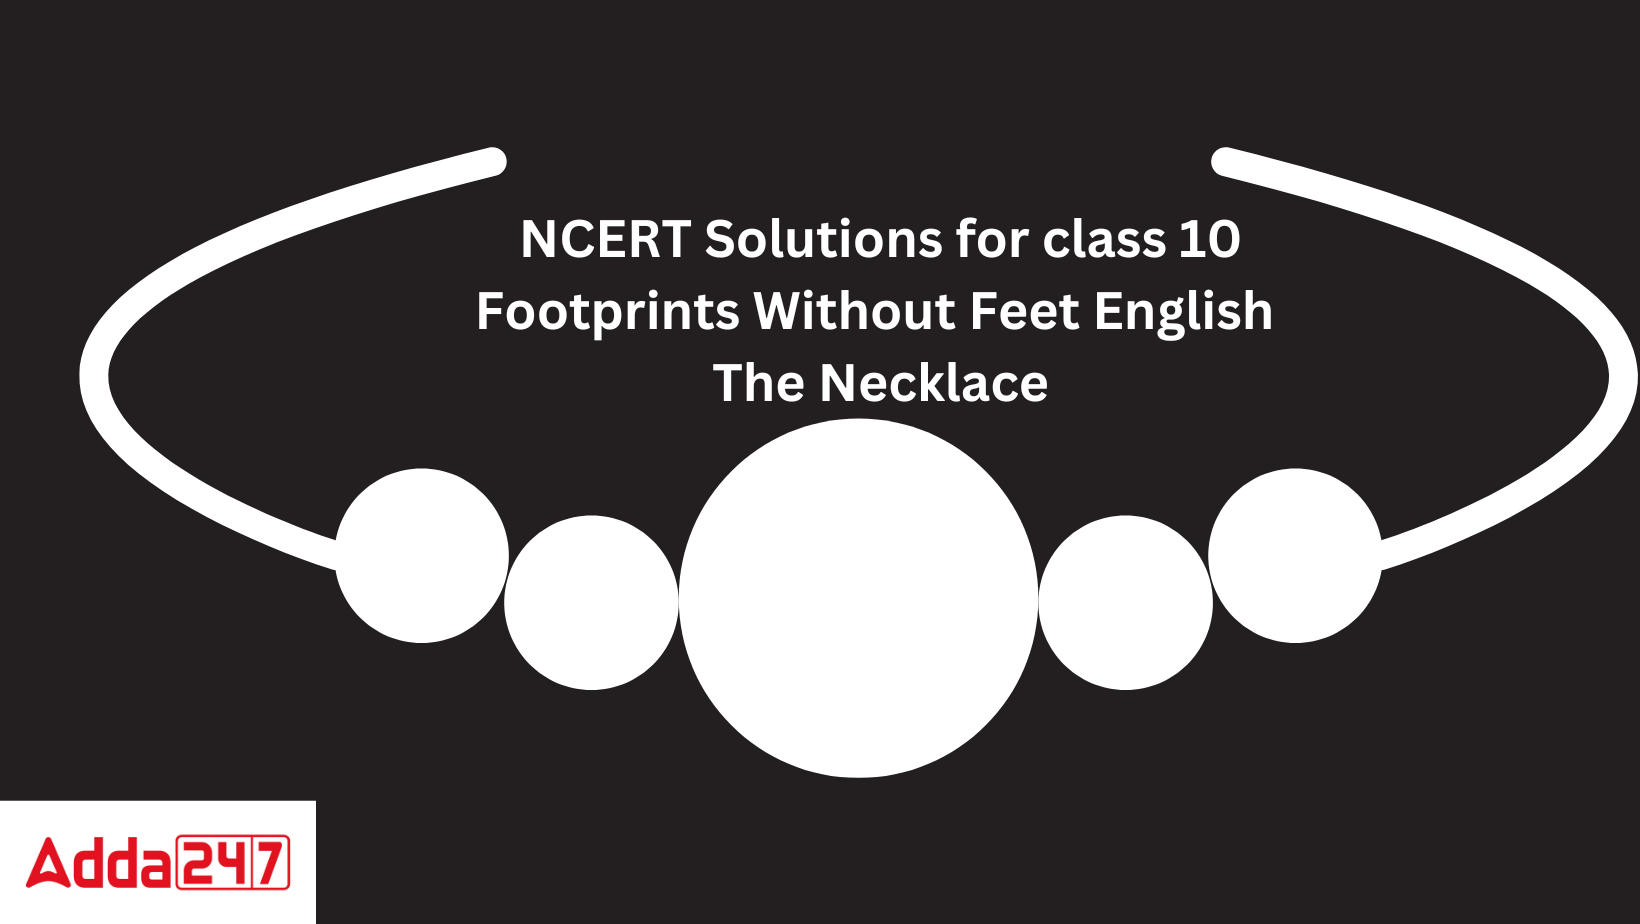 NCERT Solutions for class 10 Footprints Without Feet English The Necklace